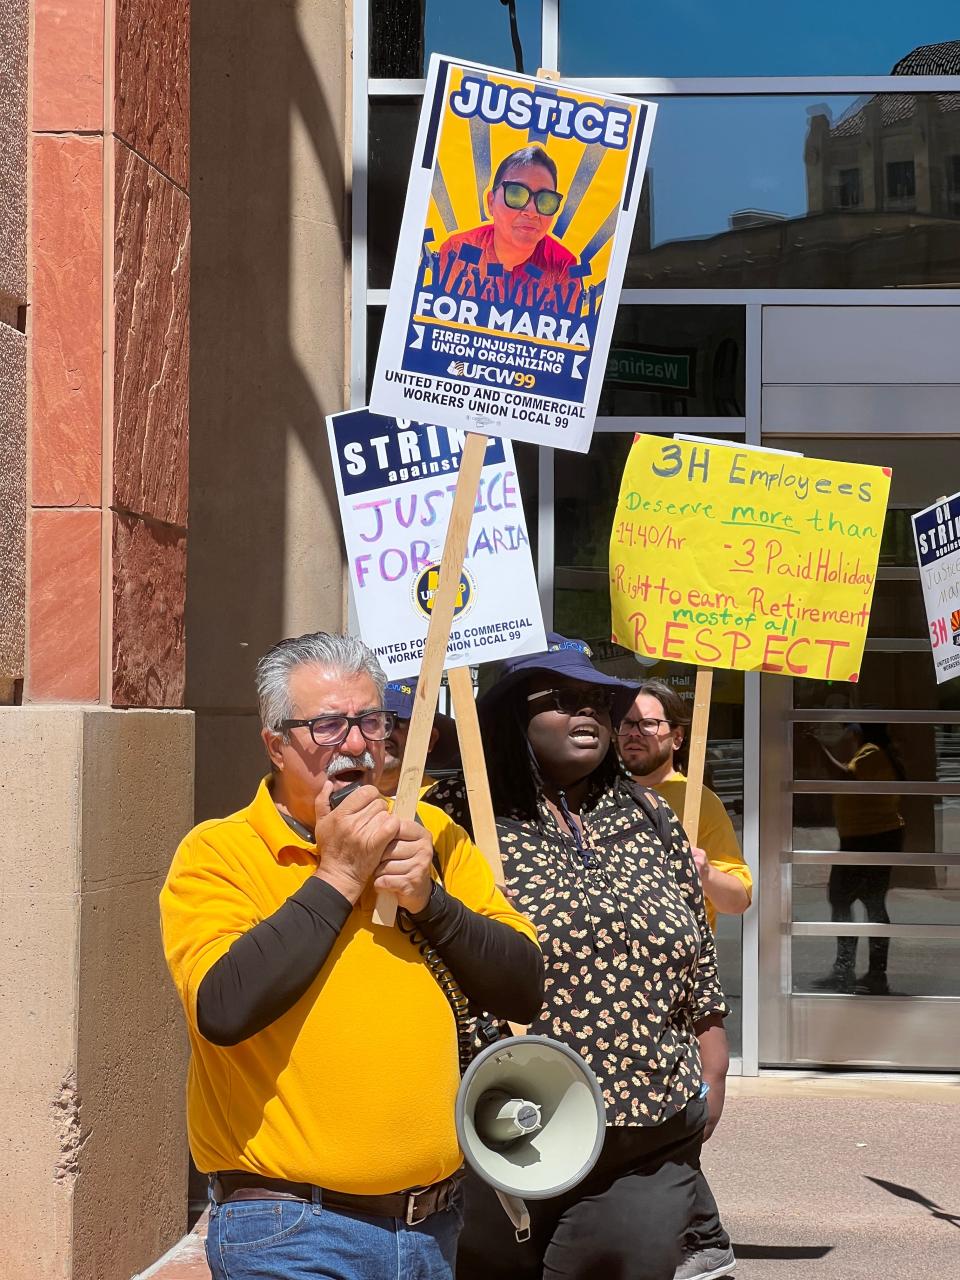 United Food and Commercial Workers Local 99 Organizing Director Martin Hernandez protests the firing of Maria Sanchez, a City Hall custodial worker who was fired for dress code by 3H & 3H. Behind are Angela Charles and David Sekaz, UFCW Local 99 organizers.